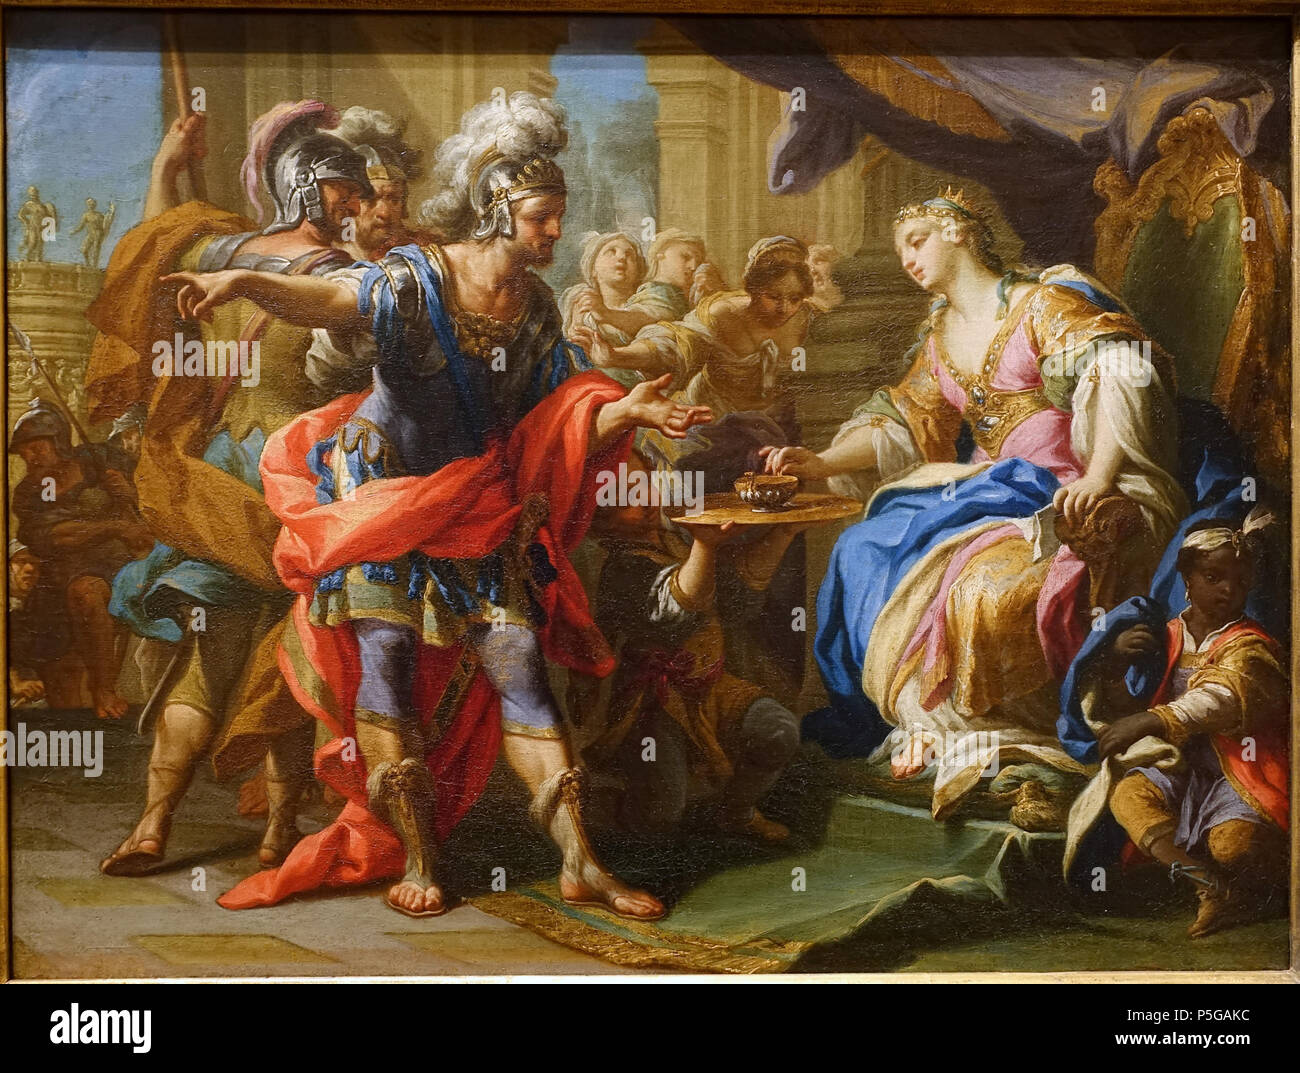 N/A. English: Exhibit in the Blanton Museum of Art - Austin, Texas, USA. This work is old enough so that it is in the . 15 November 2015, 16:16:51. Daderot 109 Anthony and Cleopatra, by Andrea Casali, Rome, late 1720s, oil on canvas - Blanton Museum of Art - Austin, Texas - DSC07995 Stock Photo